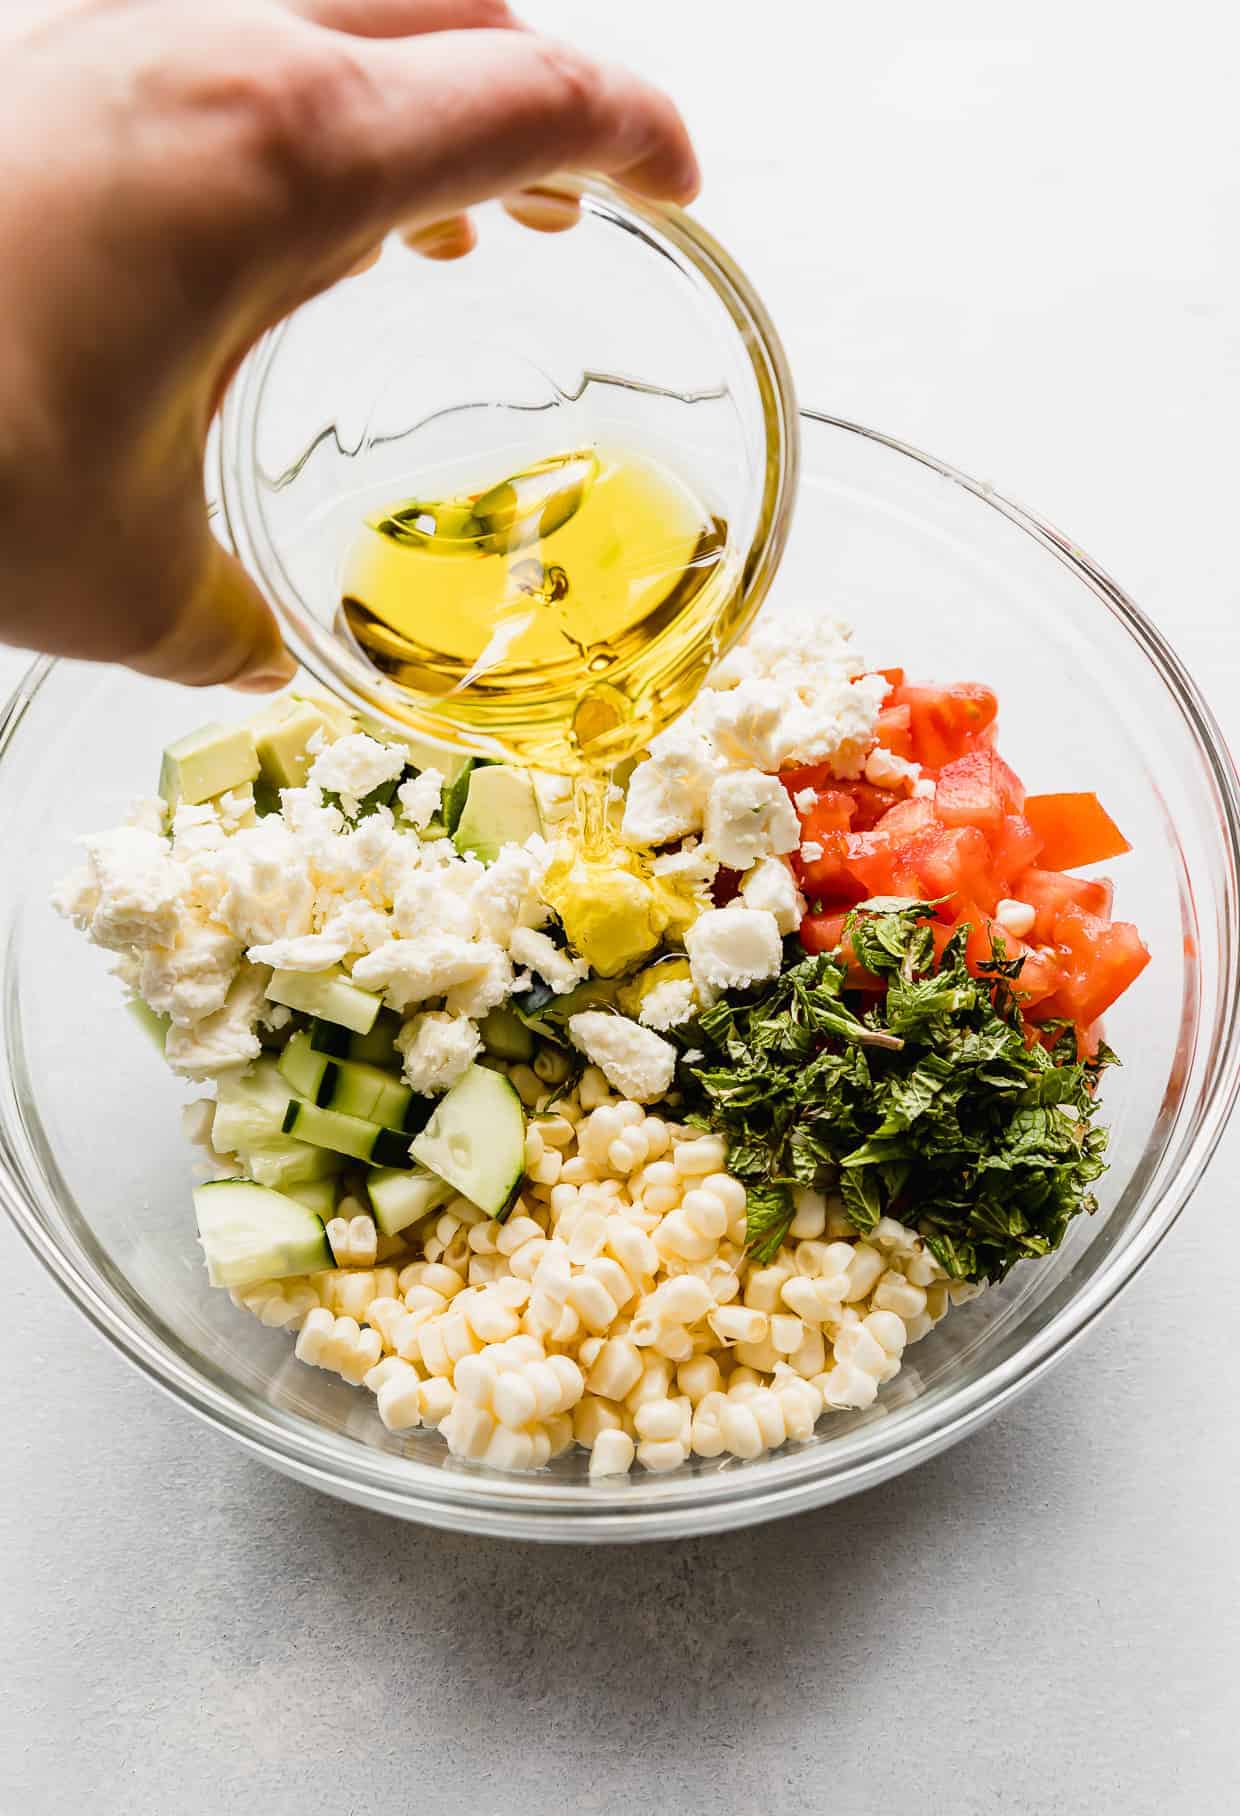 Olive oil being poured overtop of Feta Corn Salad.